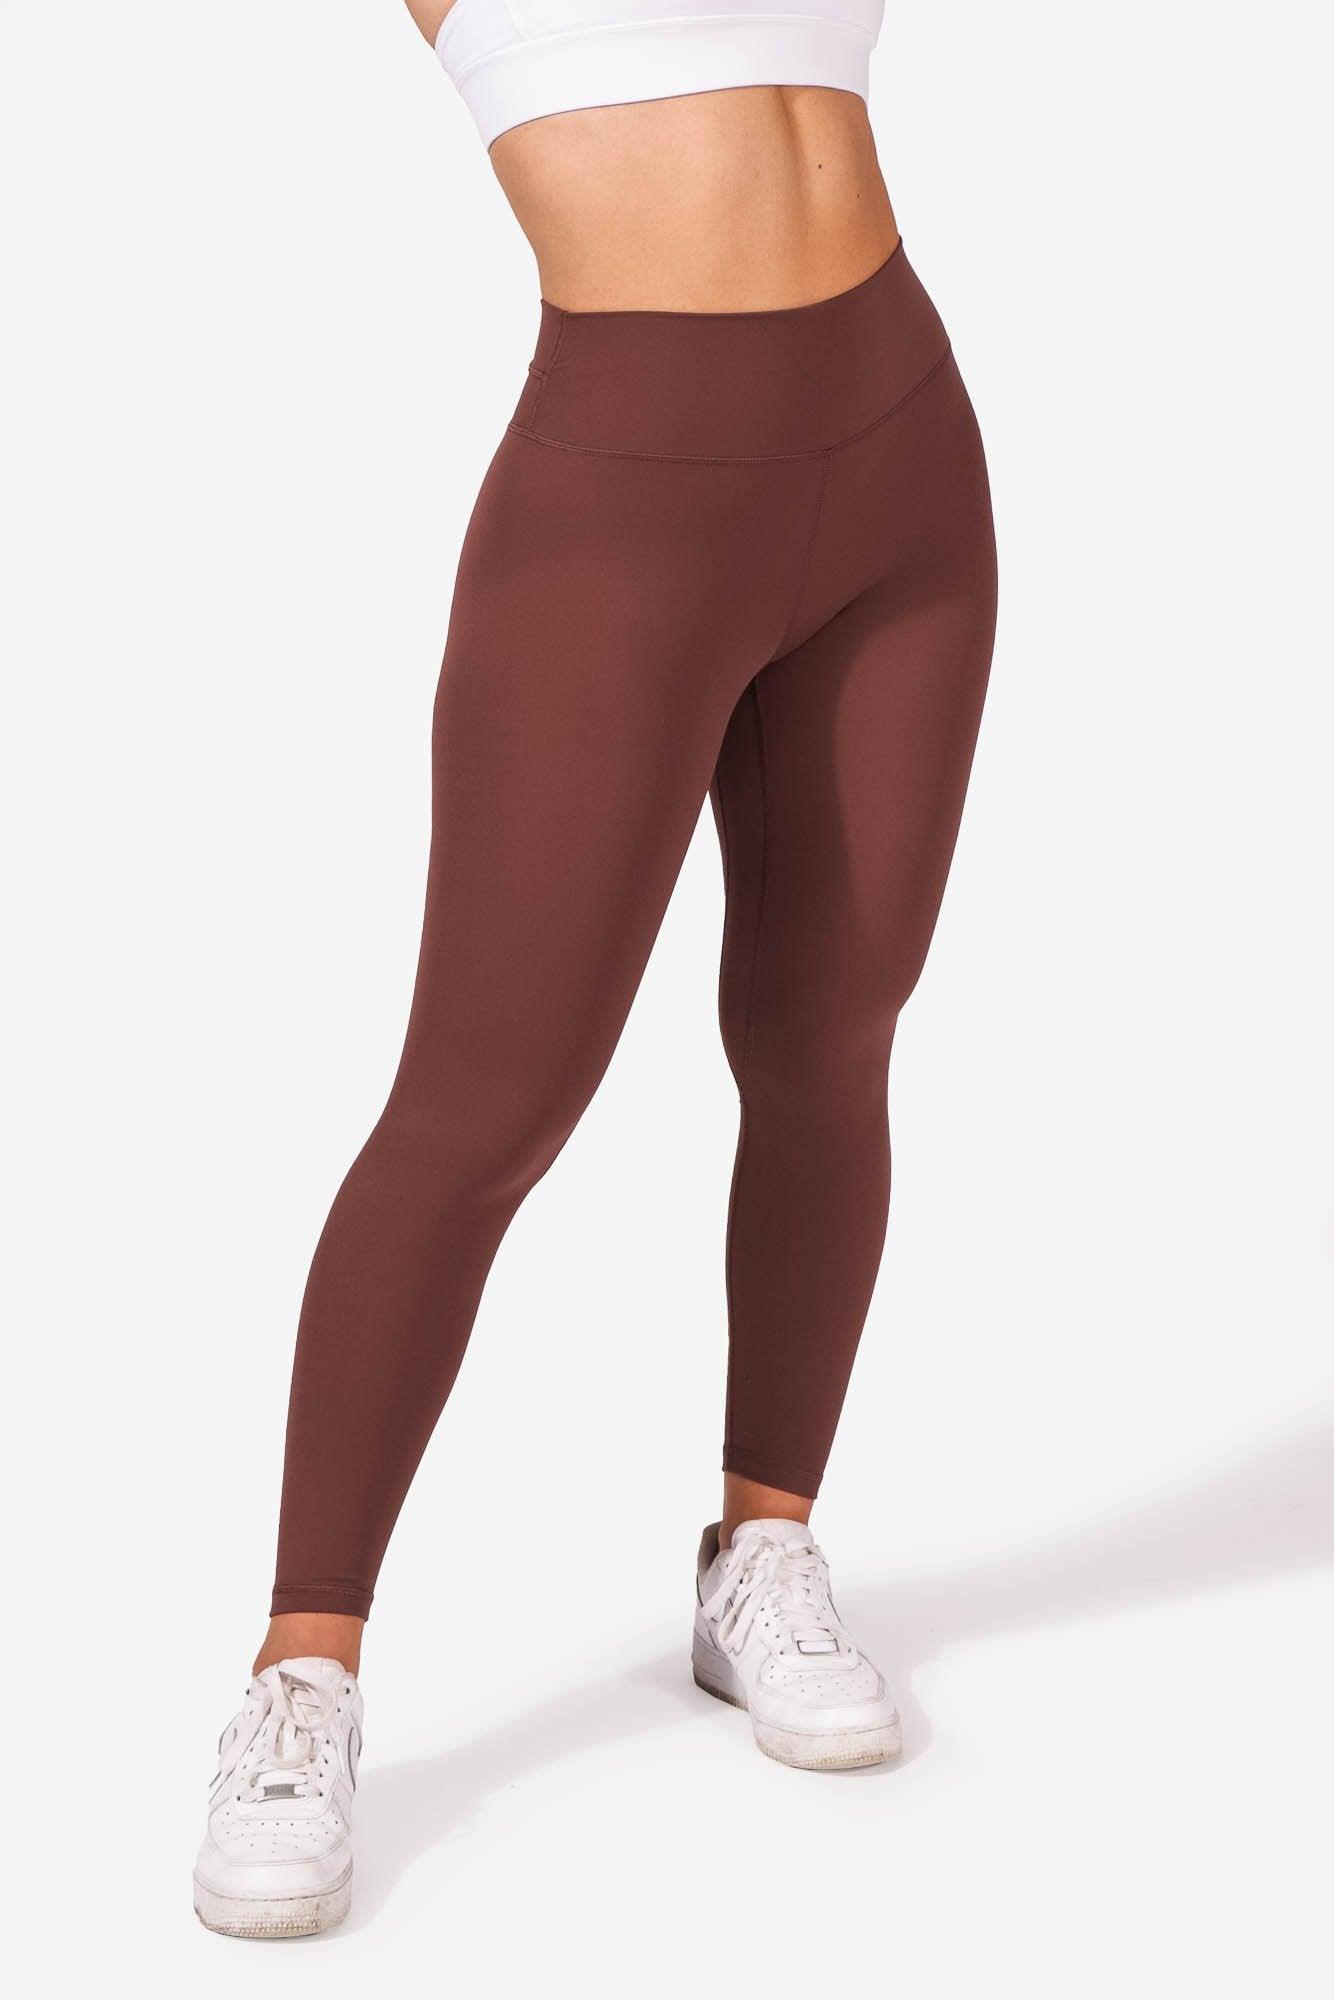 Cable Knit Seamless Fleece Lined Leggings: Coffee Brown – Closet